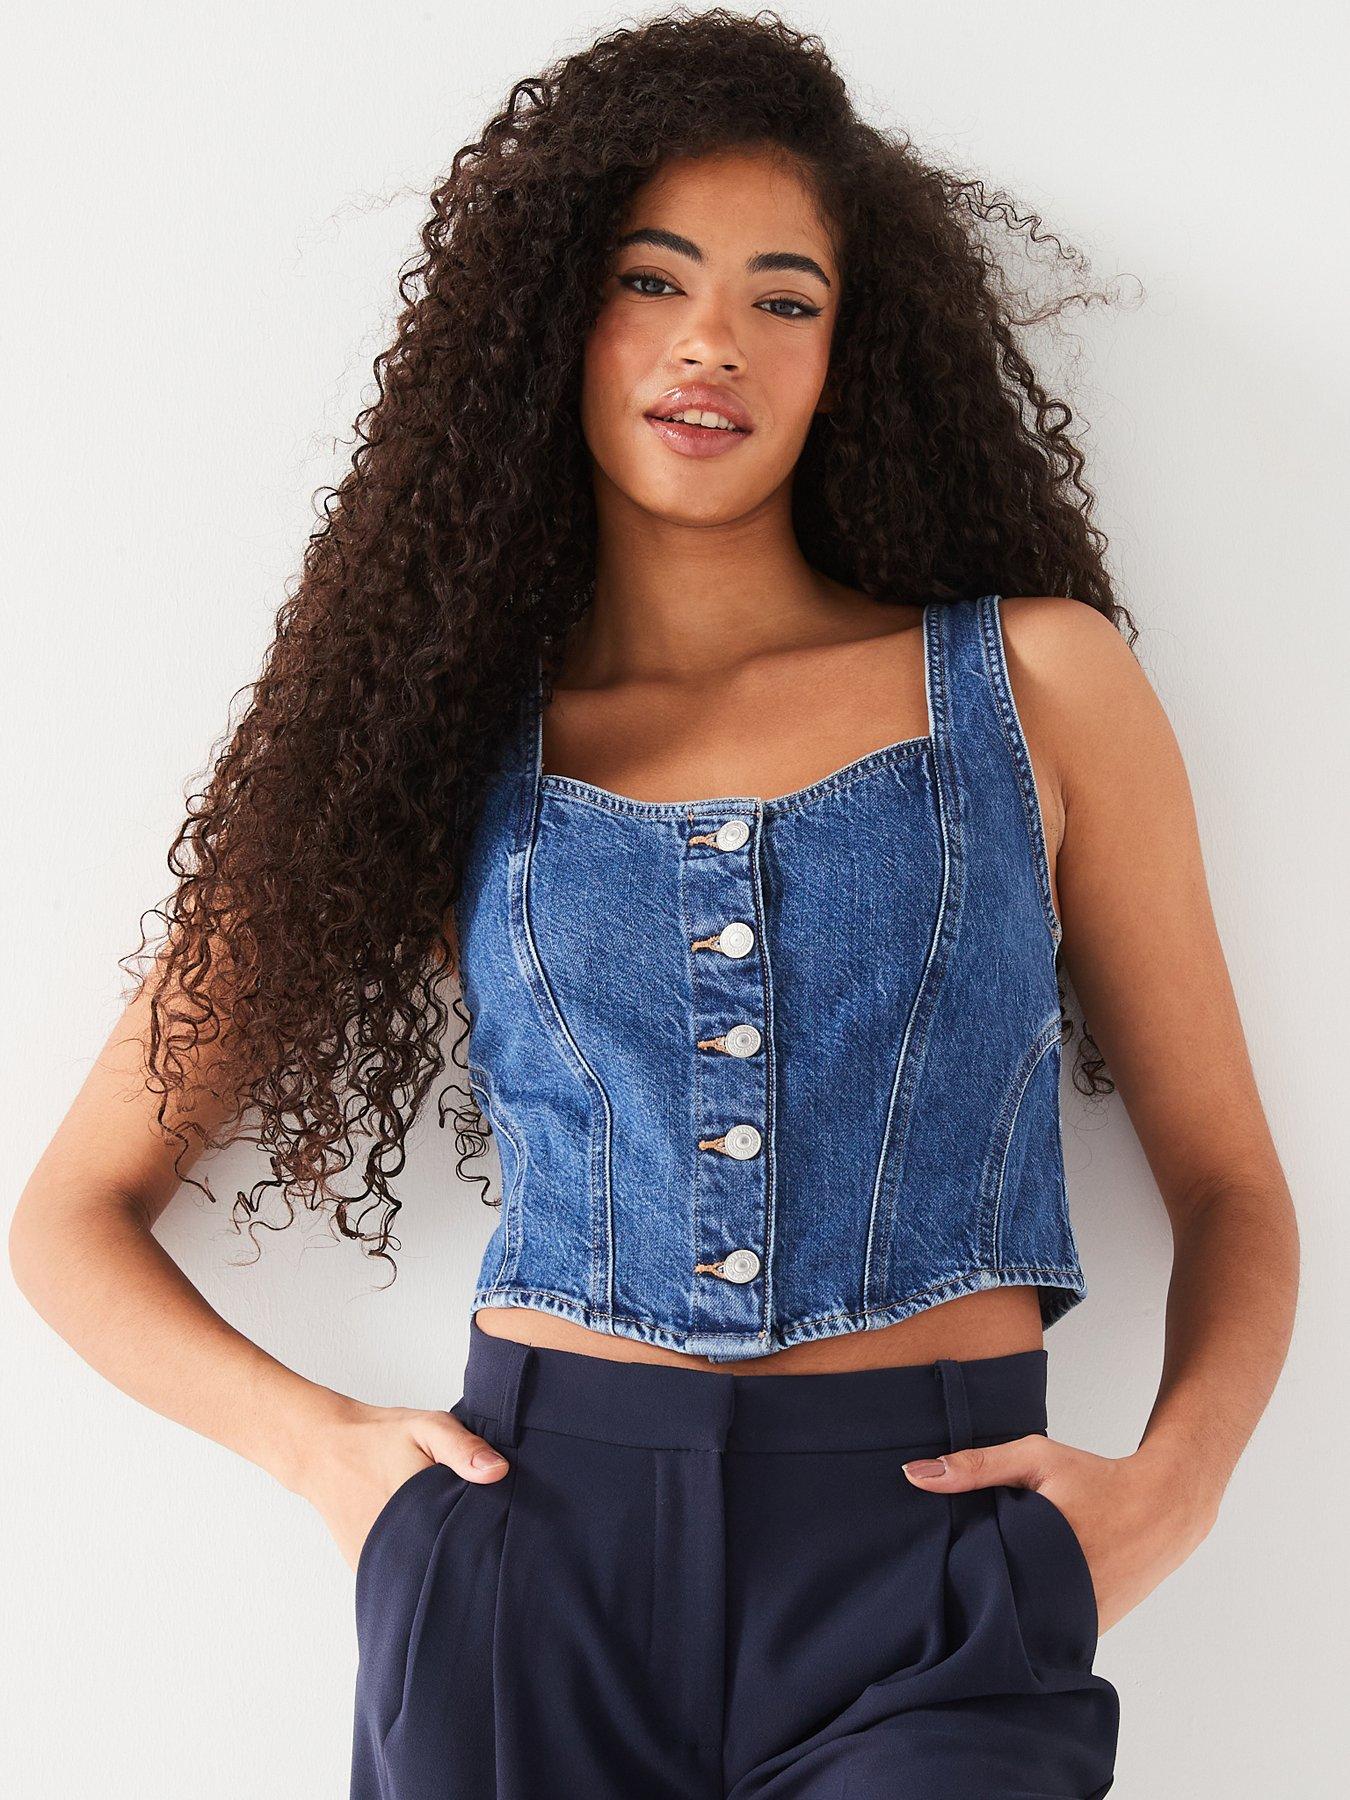 How To Style Denim Corsets, The 411